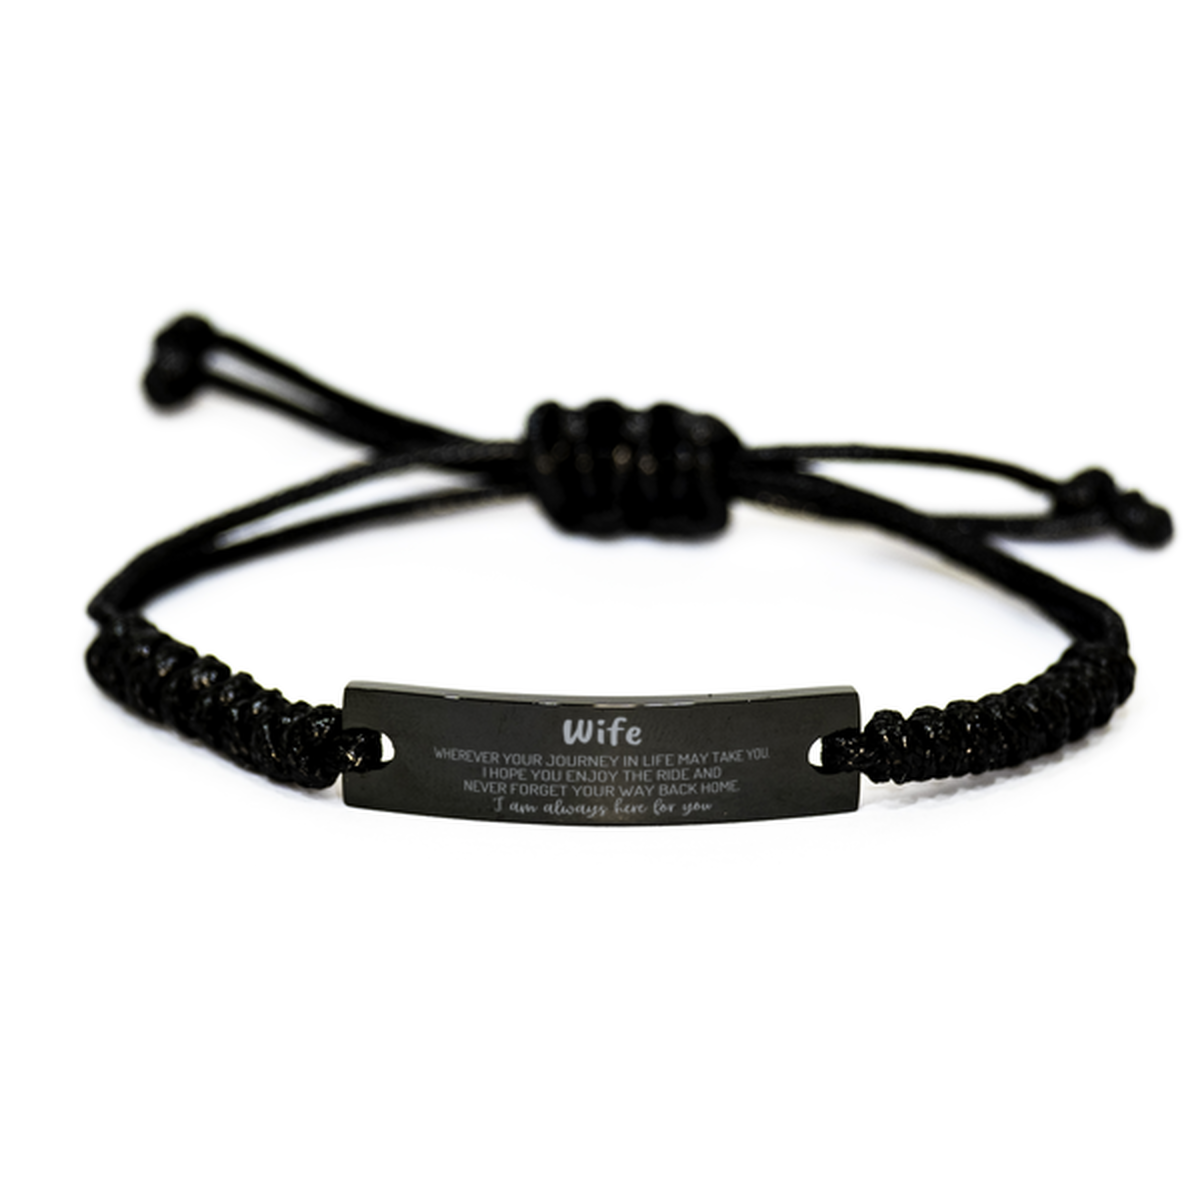 Wife wherever your journey in life may take you, I am always here for you Wife Black Rope Bracelet, Awesome Christmas Gifts For Wife, Wife Birthday Gifts for Men Women Family Loved One